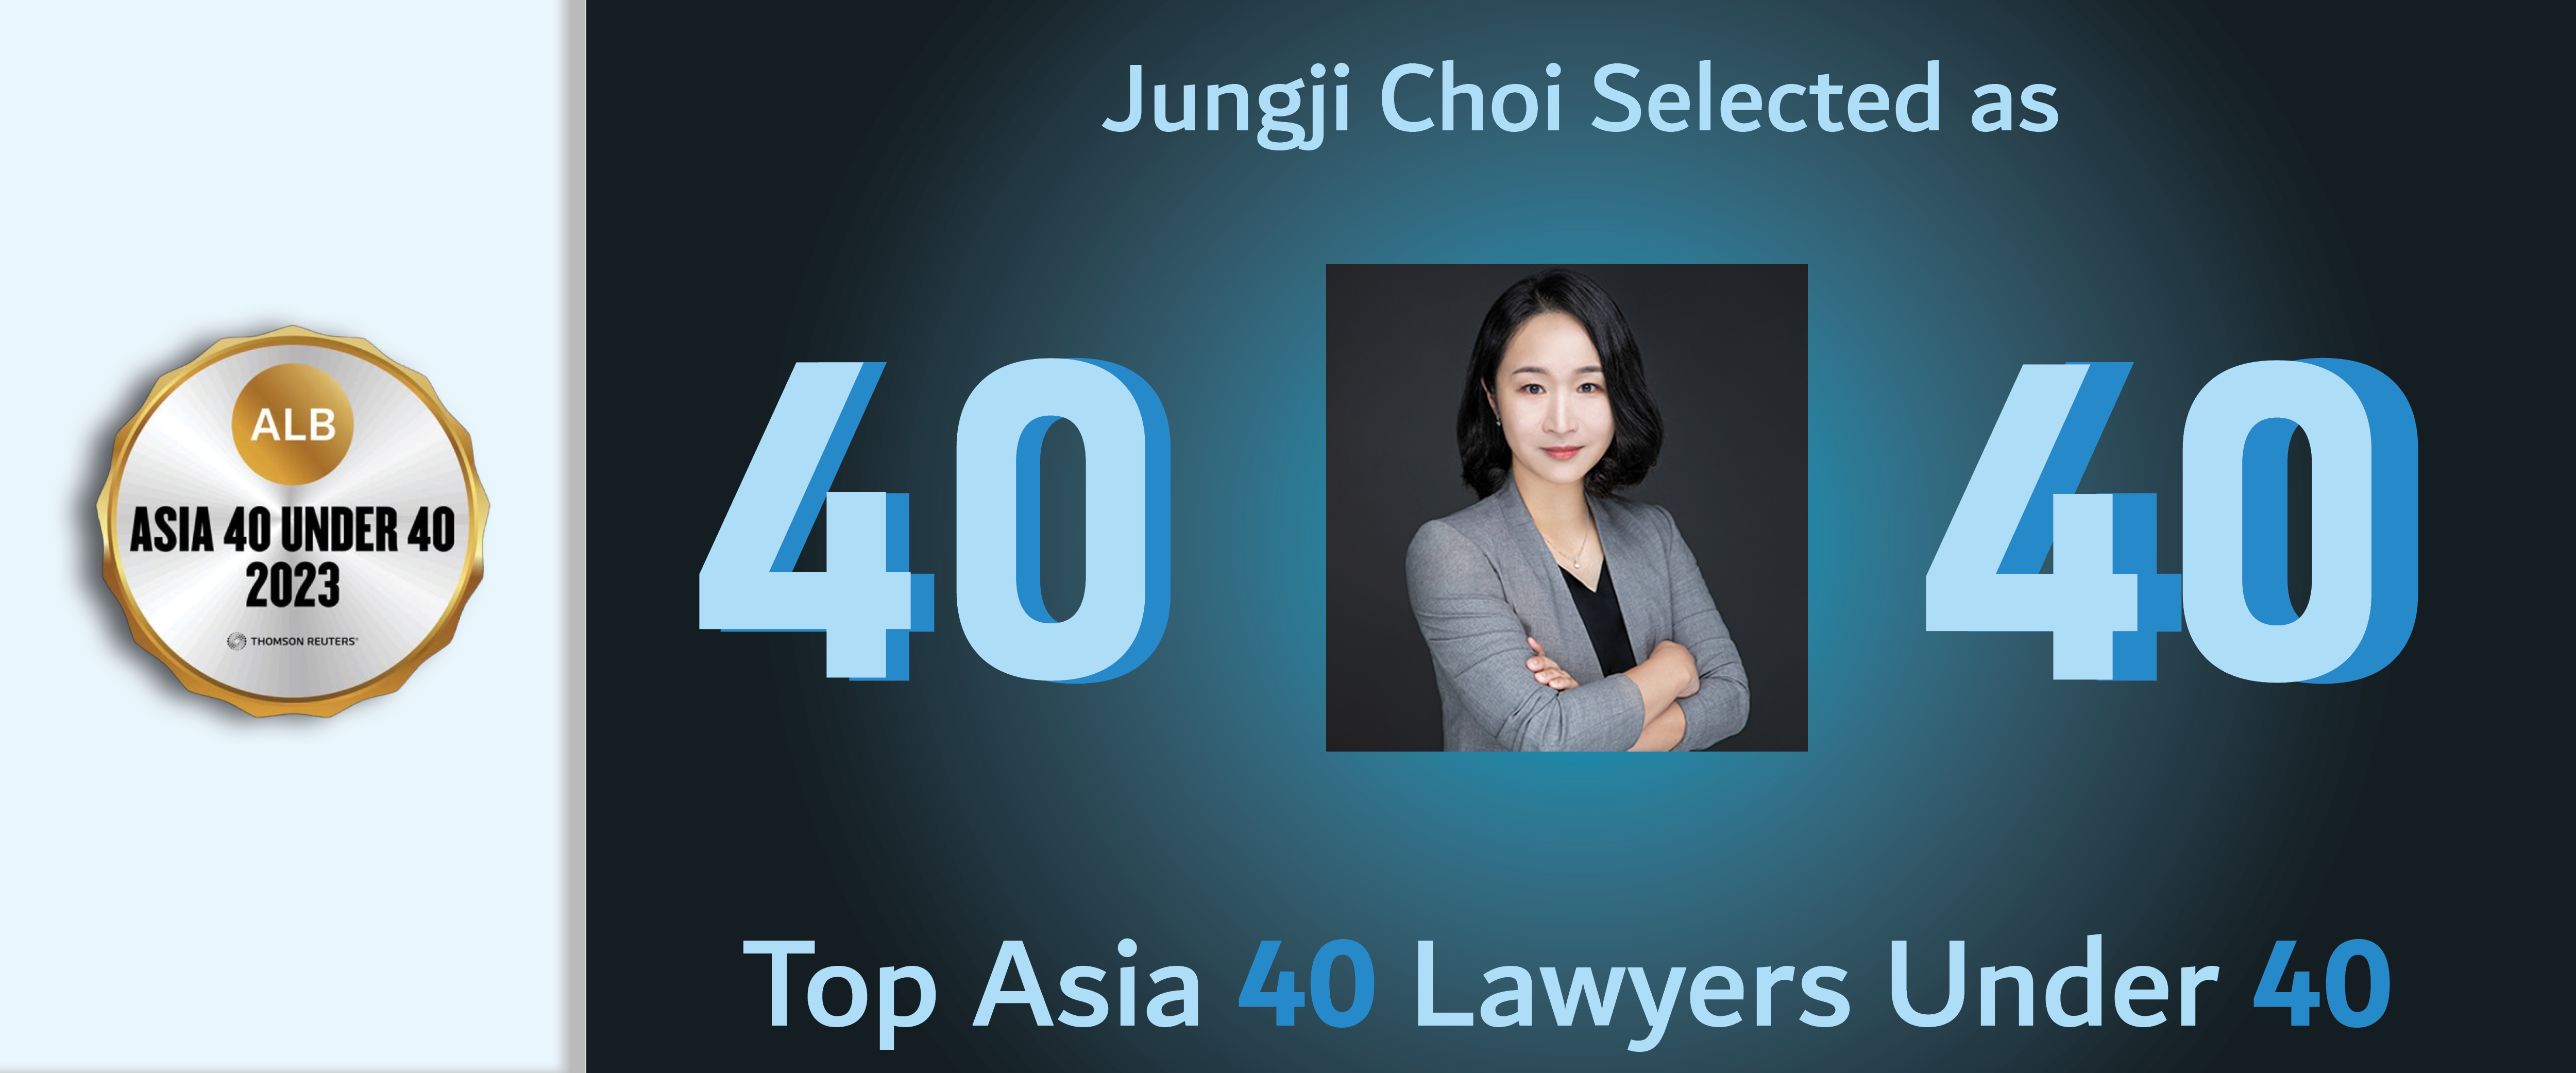 Jungji Choi Selected as Top Asia 40 Lawyers Under 40